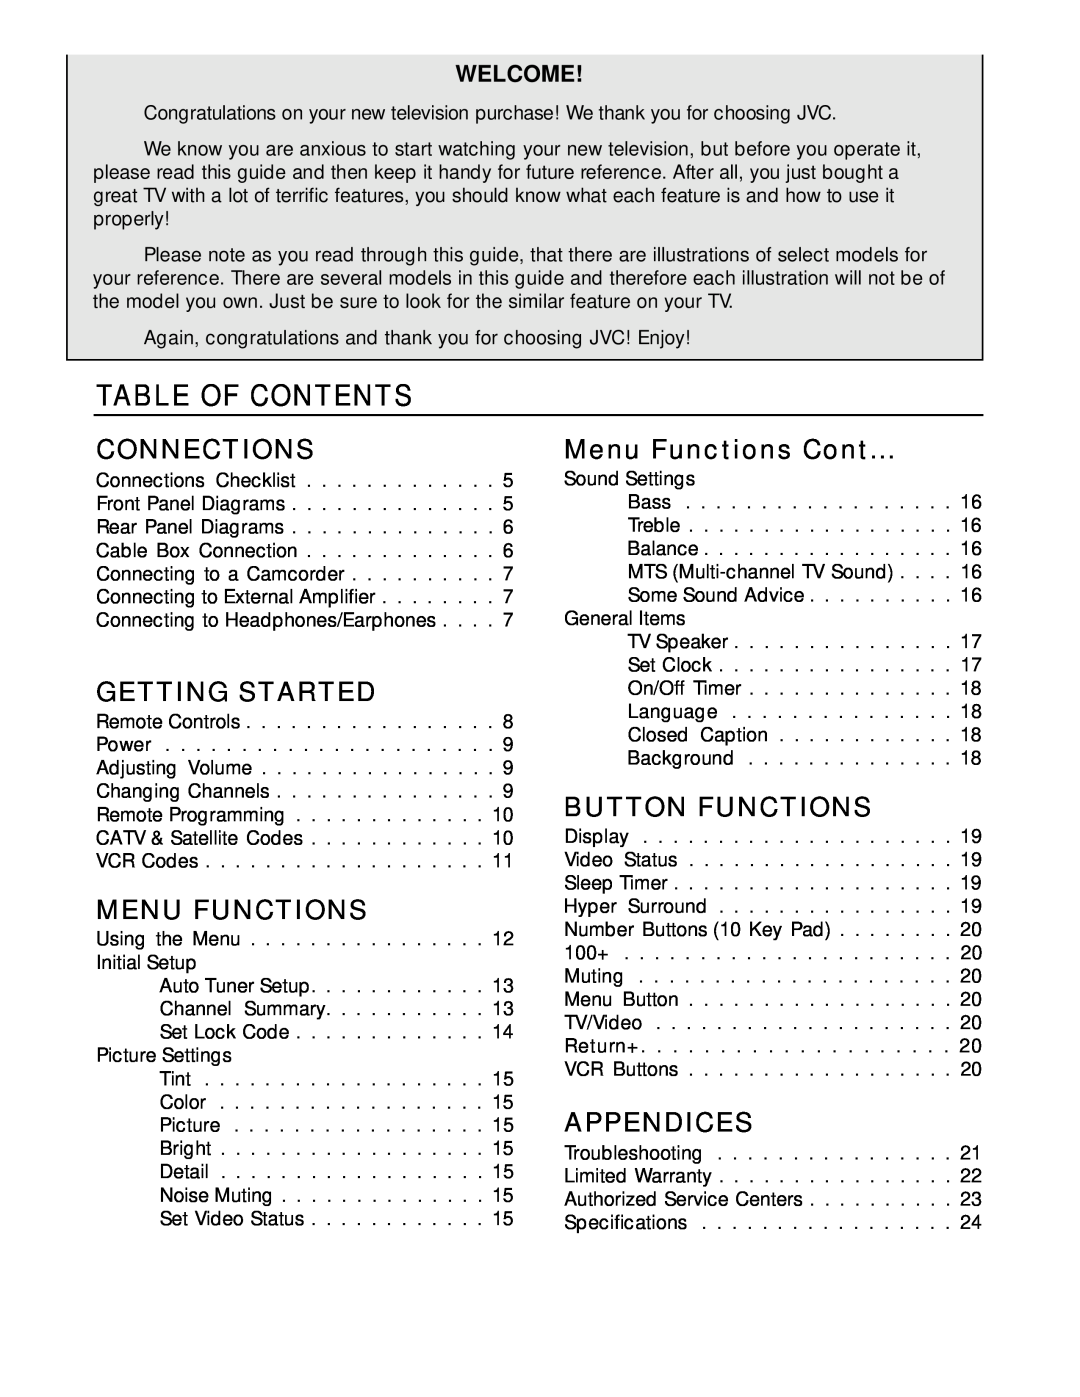 JVC AV-20020 manual Table Of Contents, Connections, Getting Started, Menu Functions Cont, Button Functions, Appendices 